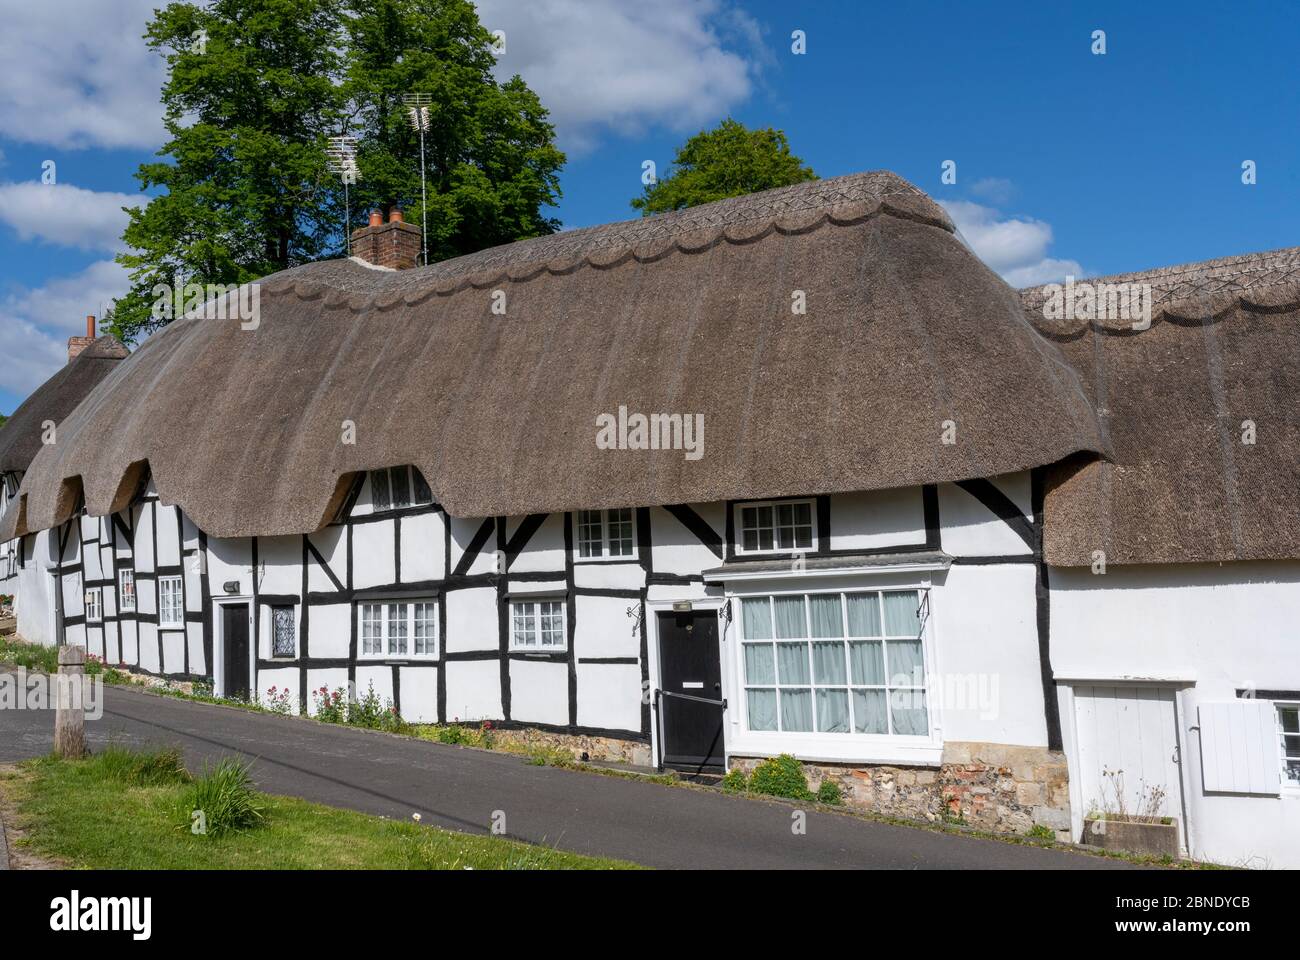 Row of timber framed thatched cottages in the Hampshire Village of Wherwell, Test Valley, Hampshire, England, UK. Stock Photo